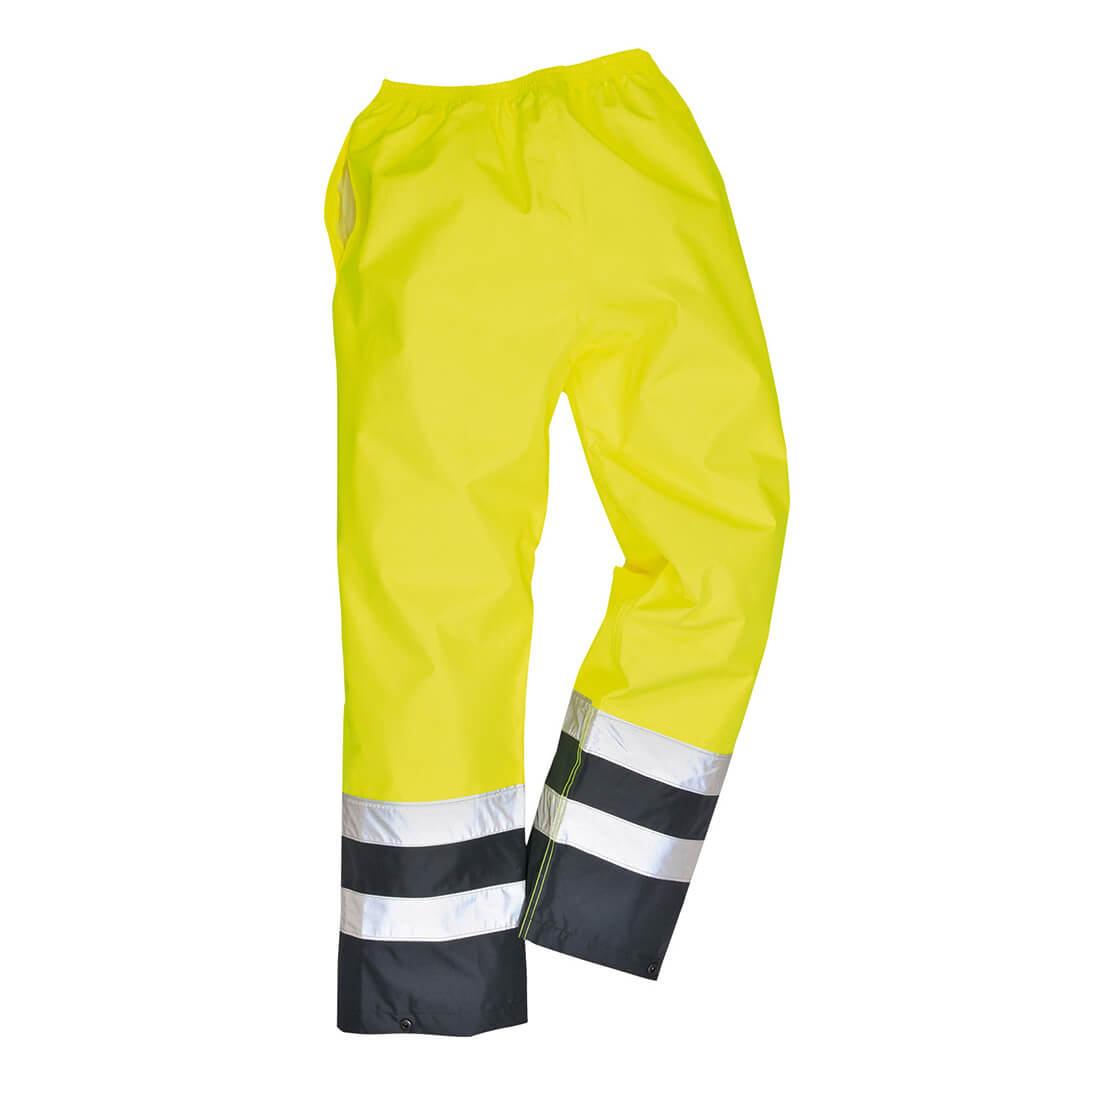 Image of Oxford Weave 300D Class 2 Two Tone Hi Vis Trousers Yellow / Navy XL